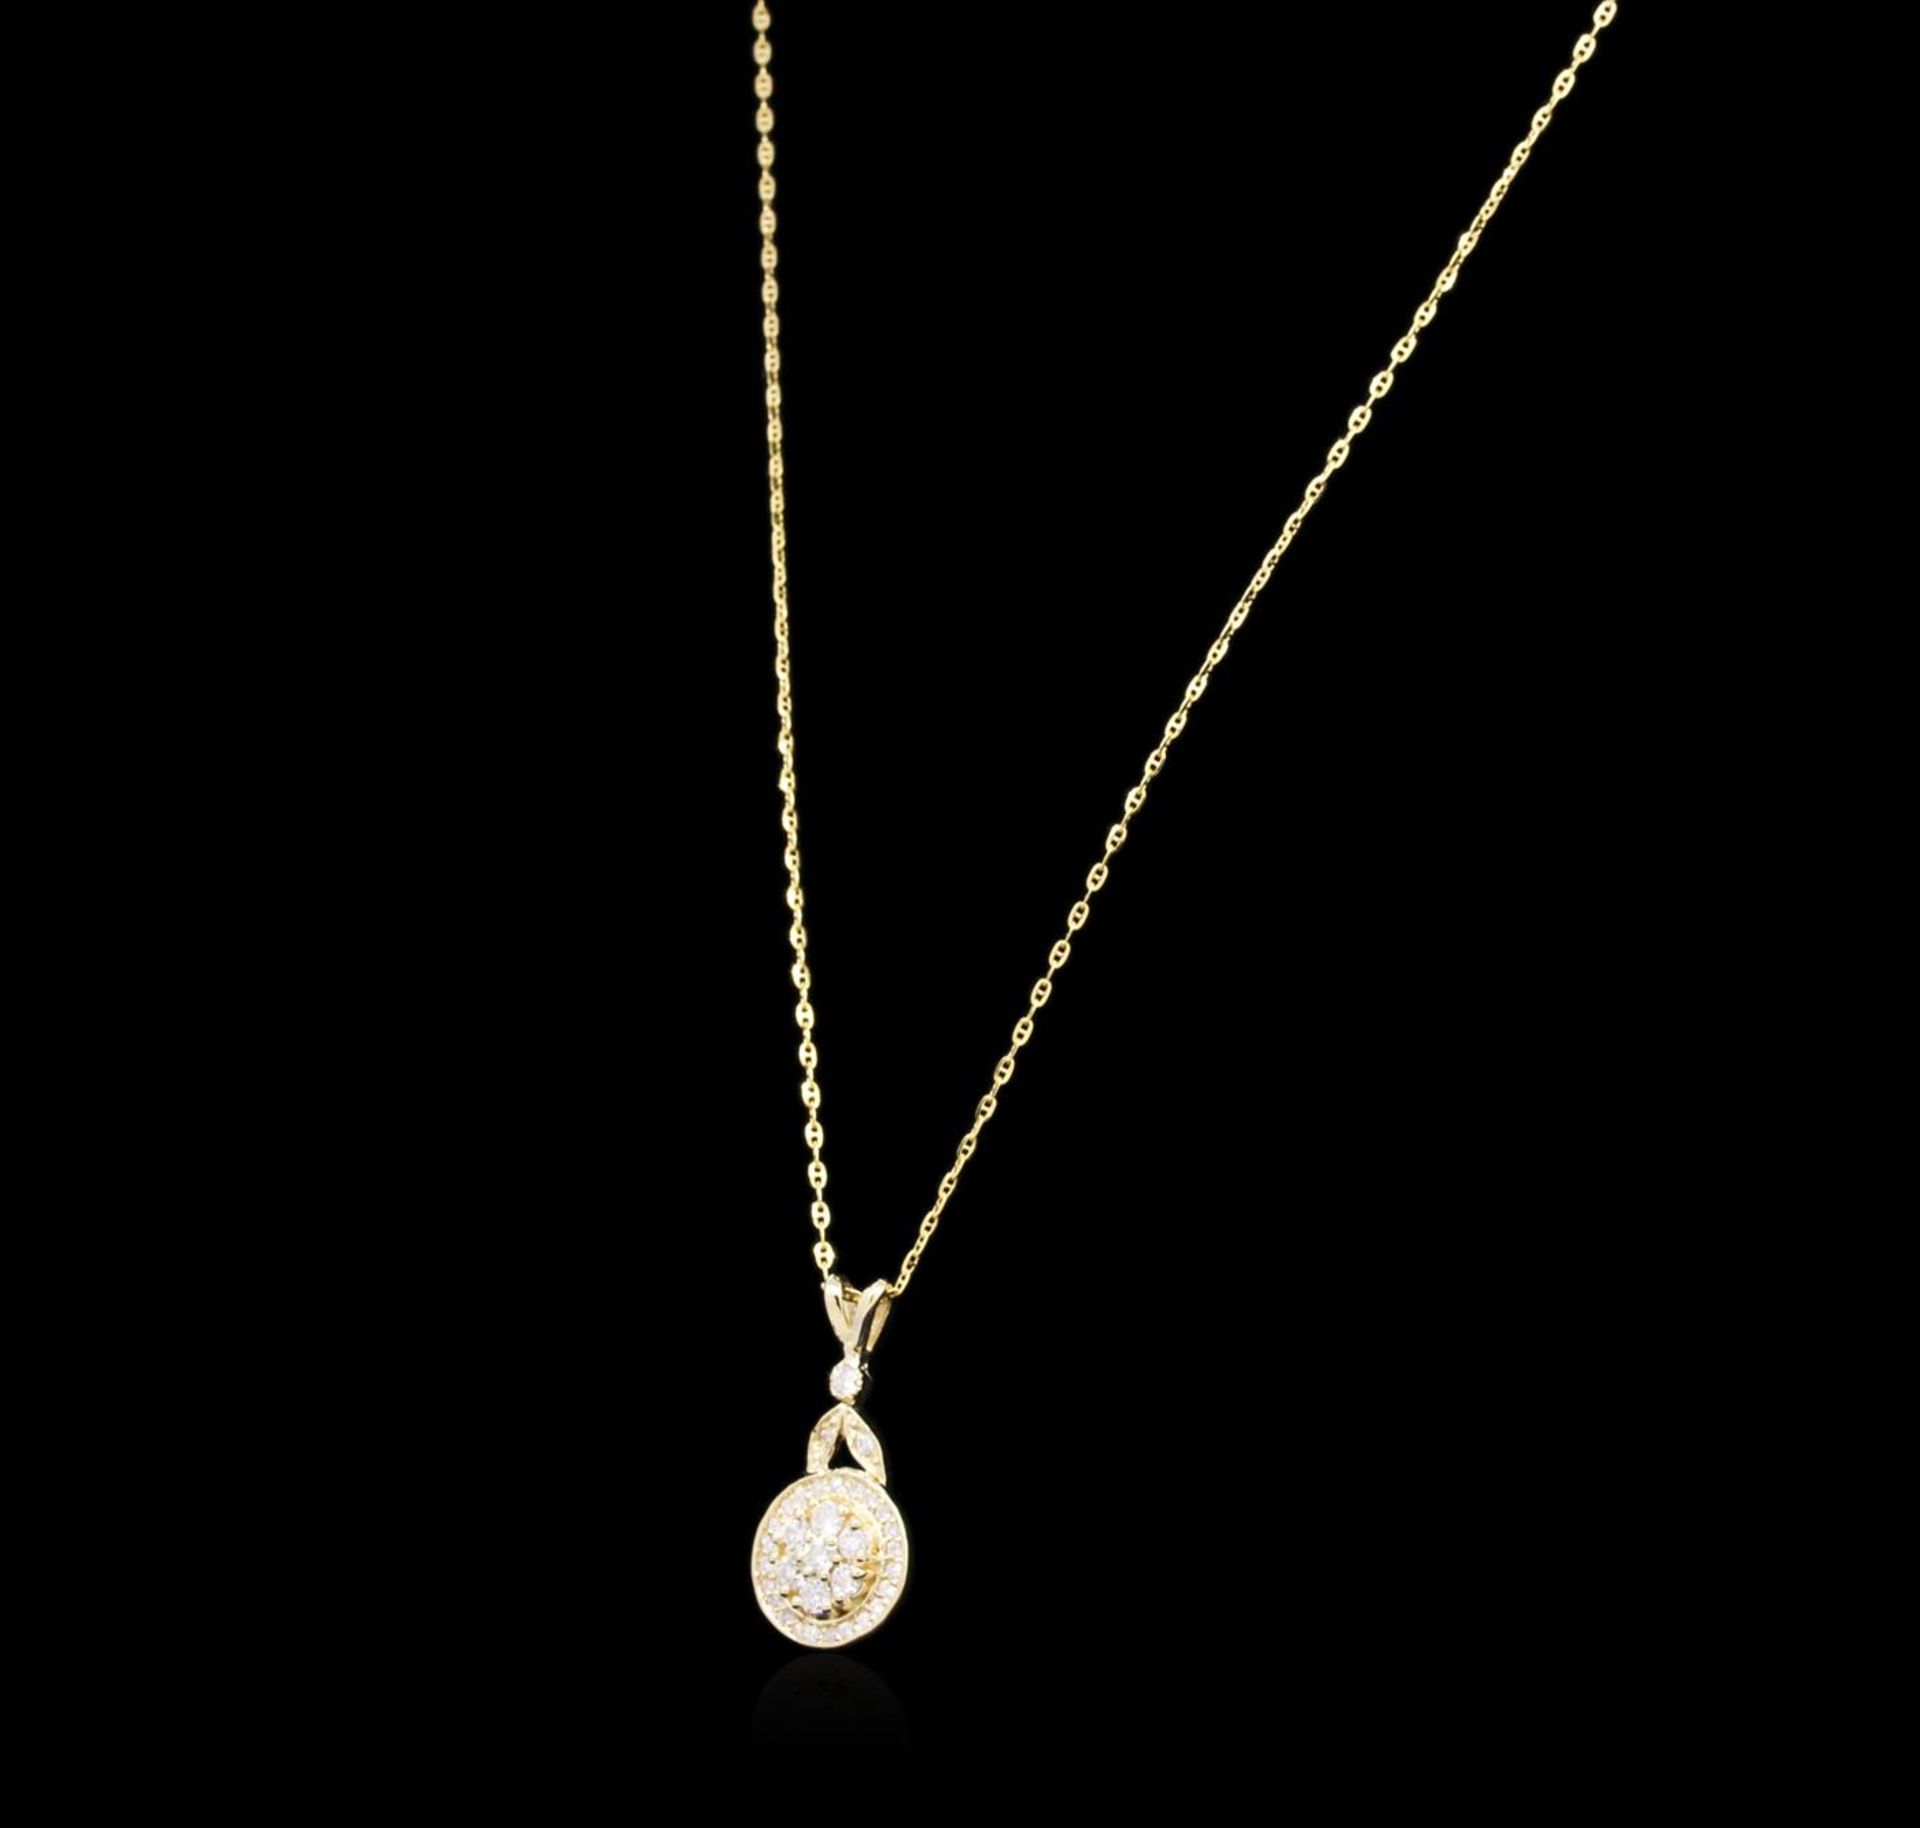 14KT Yellow Gold 0.37 ctw Diamond Pendant With Chain - Image 3 of 4